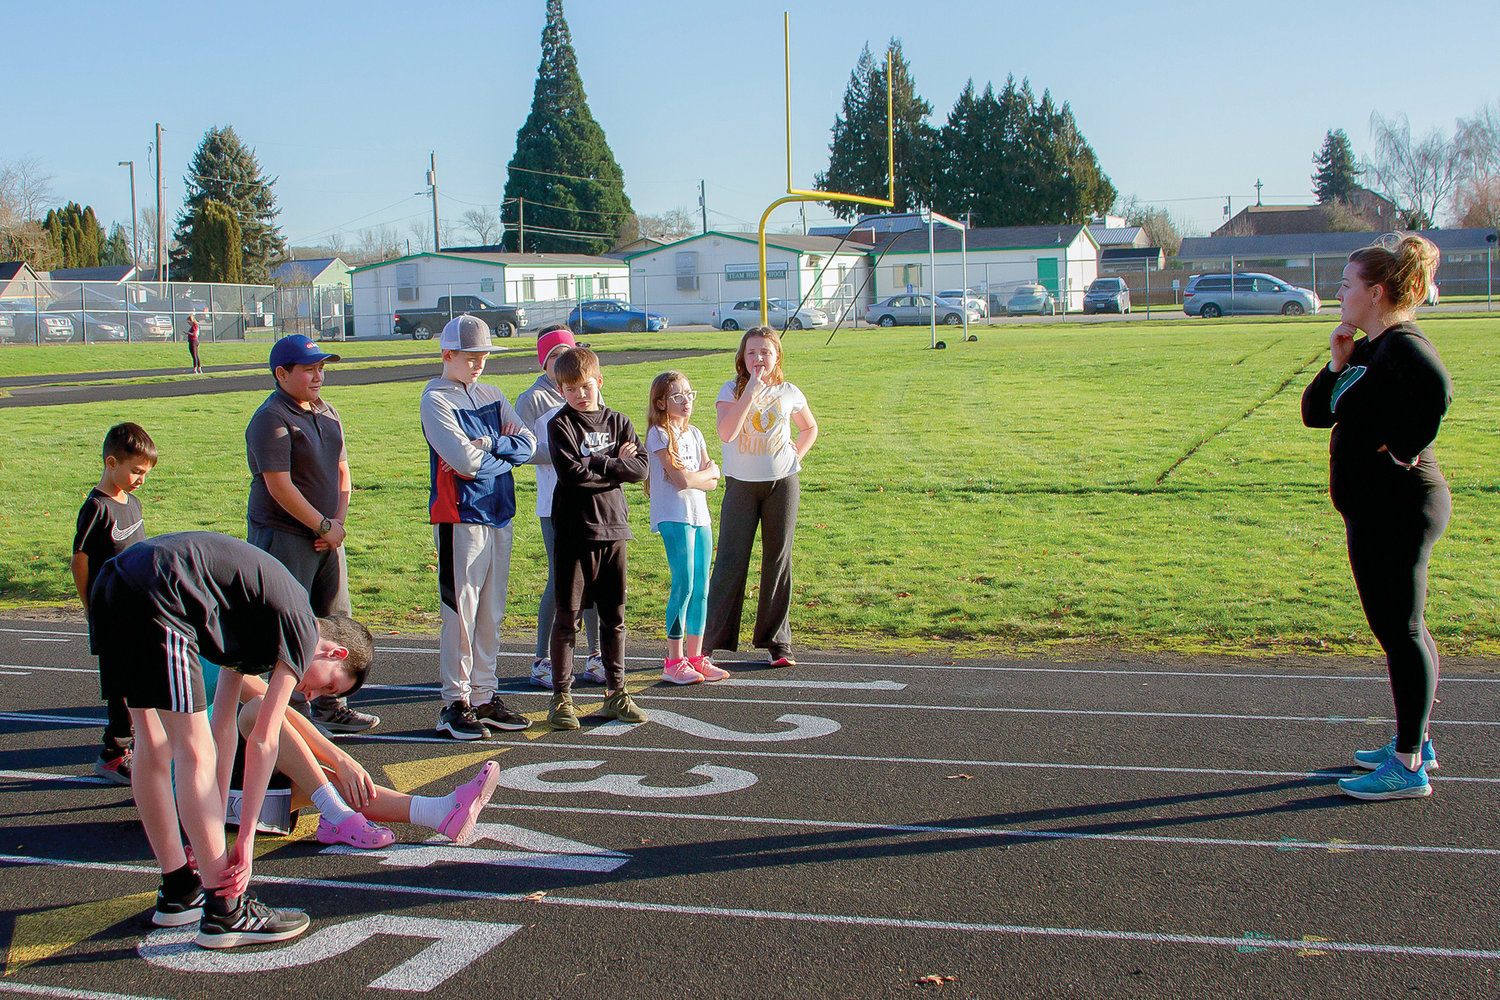 Students from Woodland Middle School’s running club will design a 5K course that is wheelchair accessible.